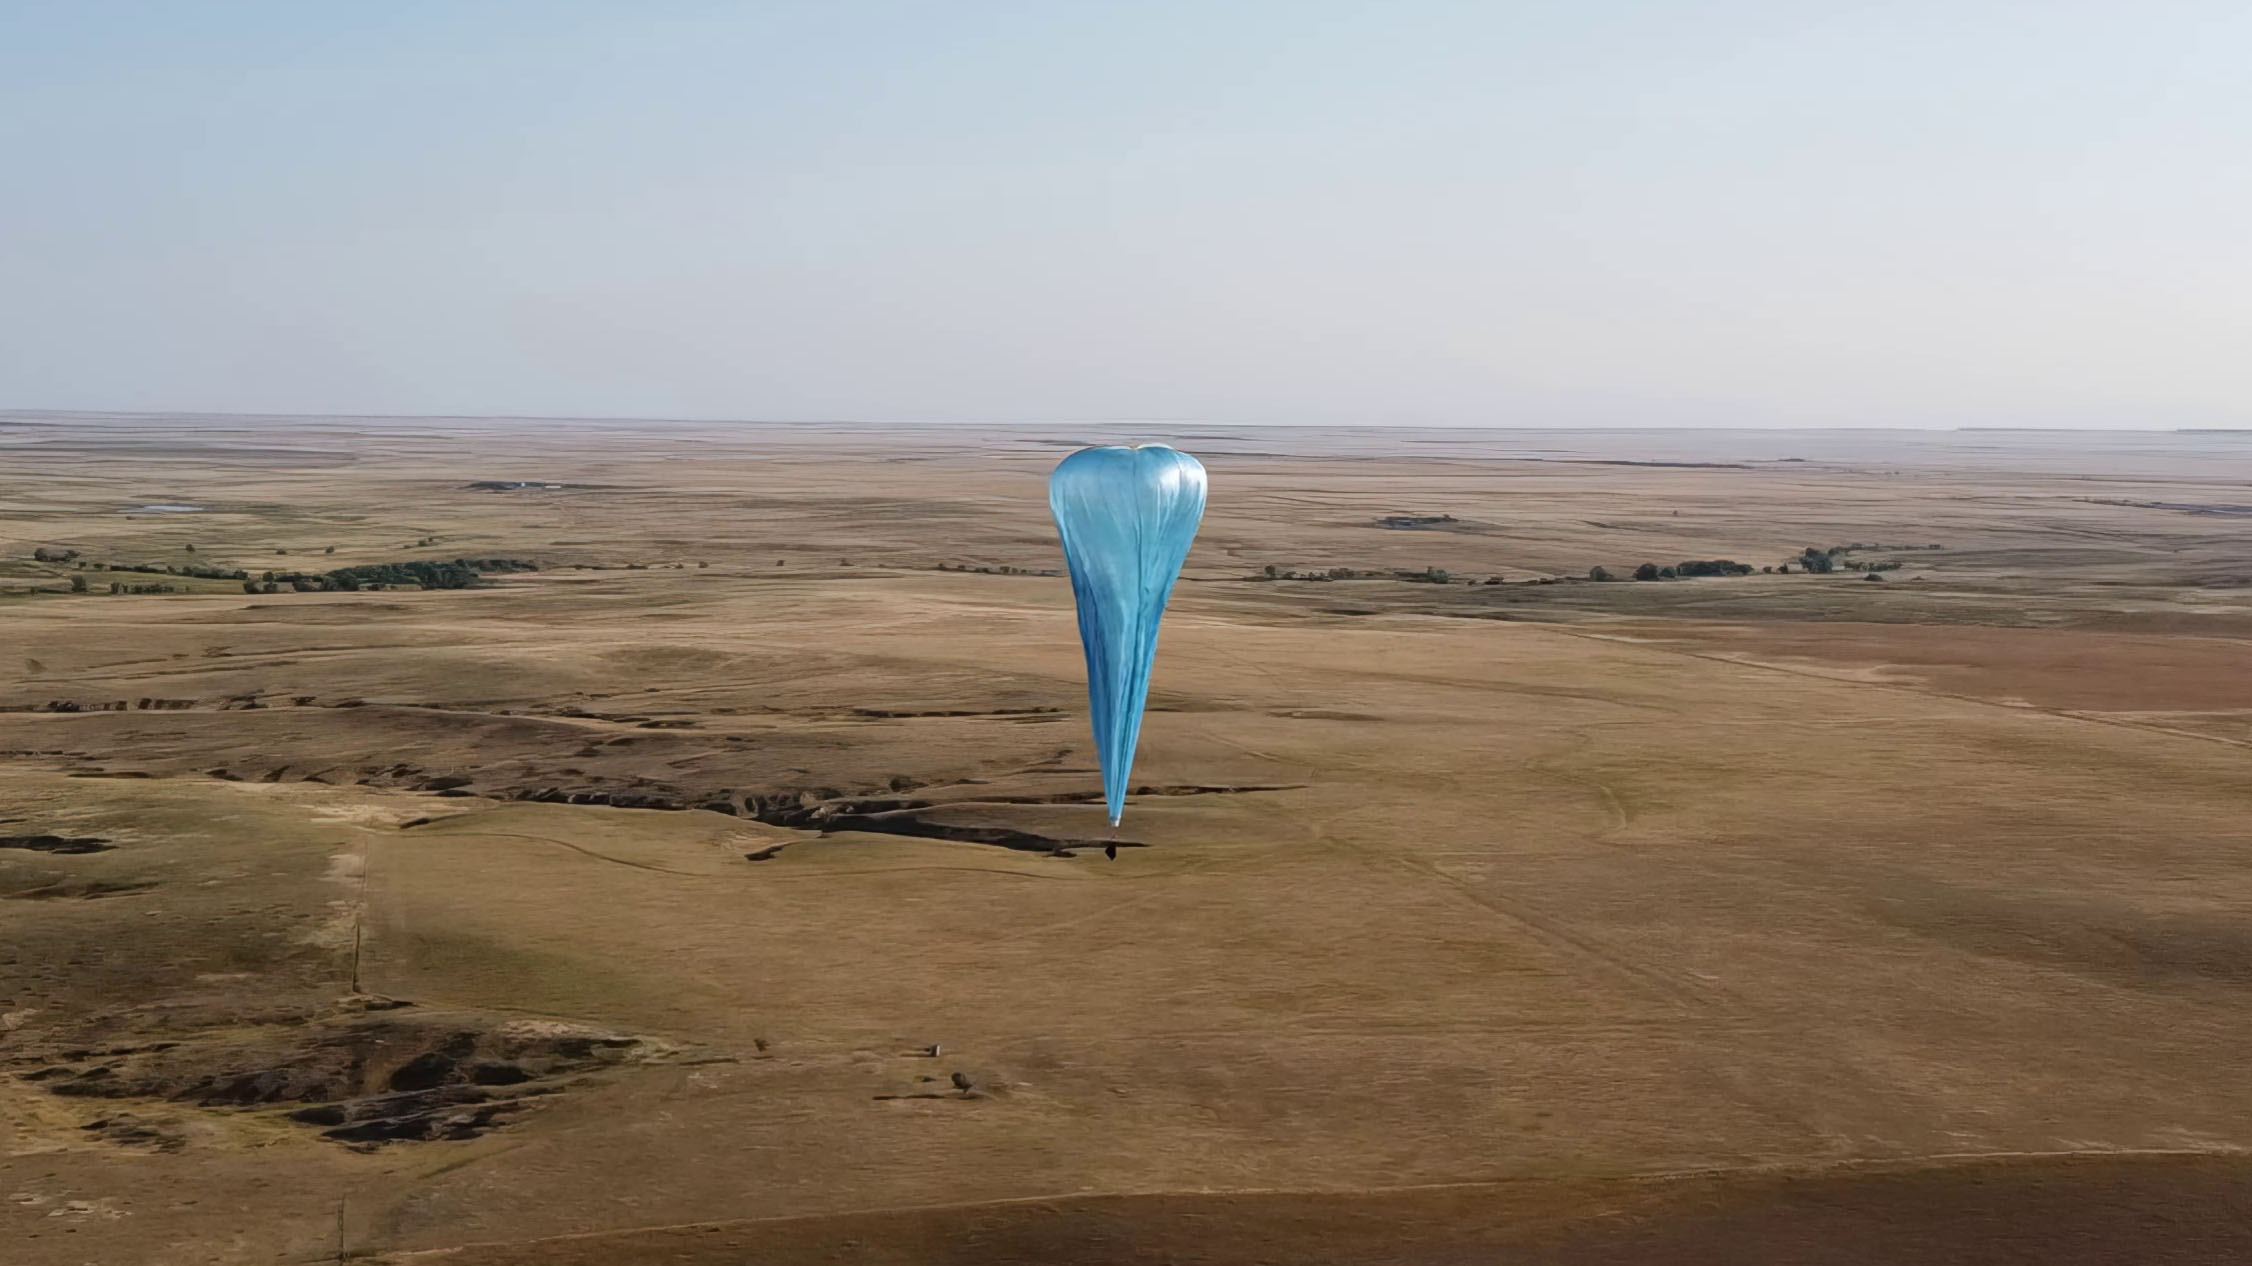 An Urban Sky Microballoon pictured shortly after launch near Greeley, CO.